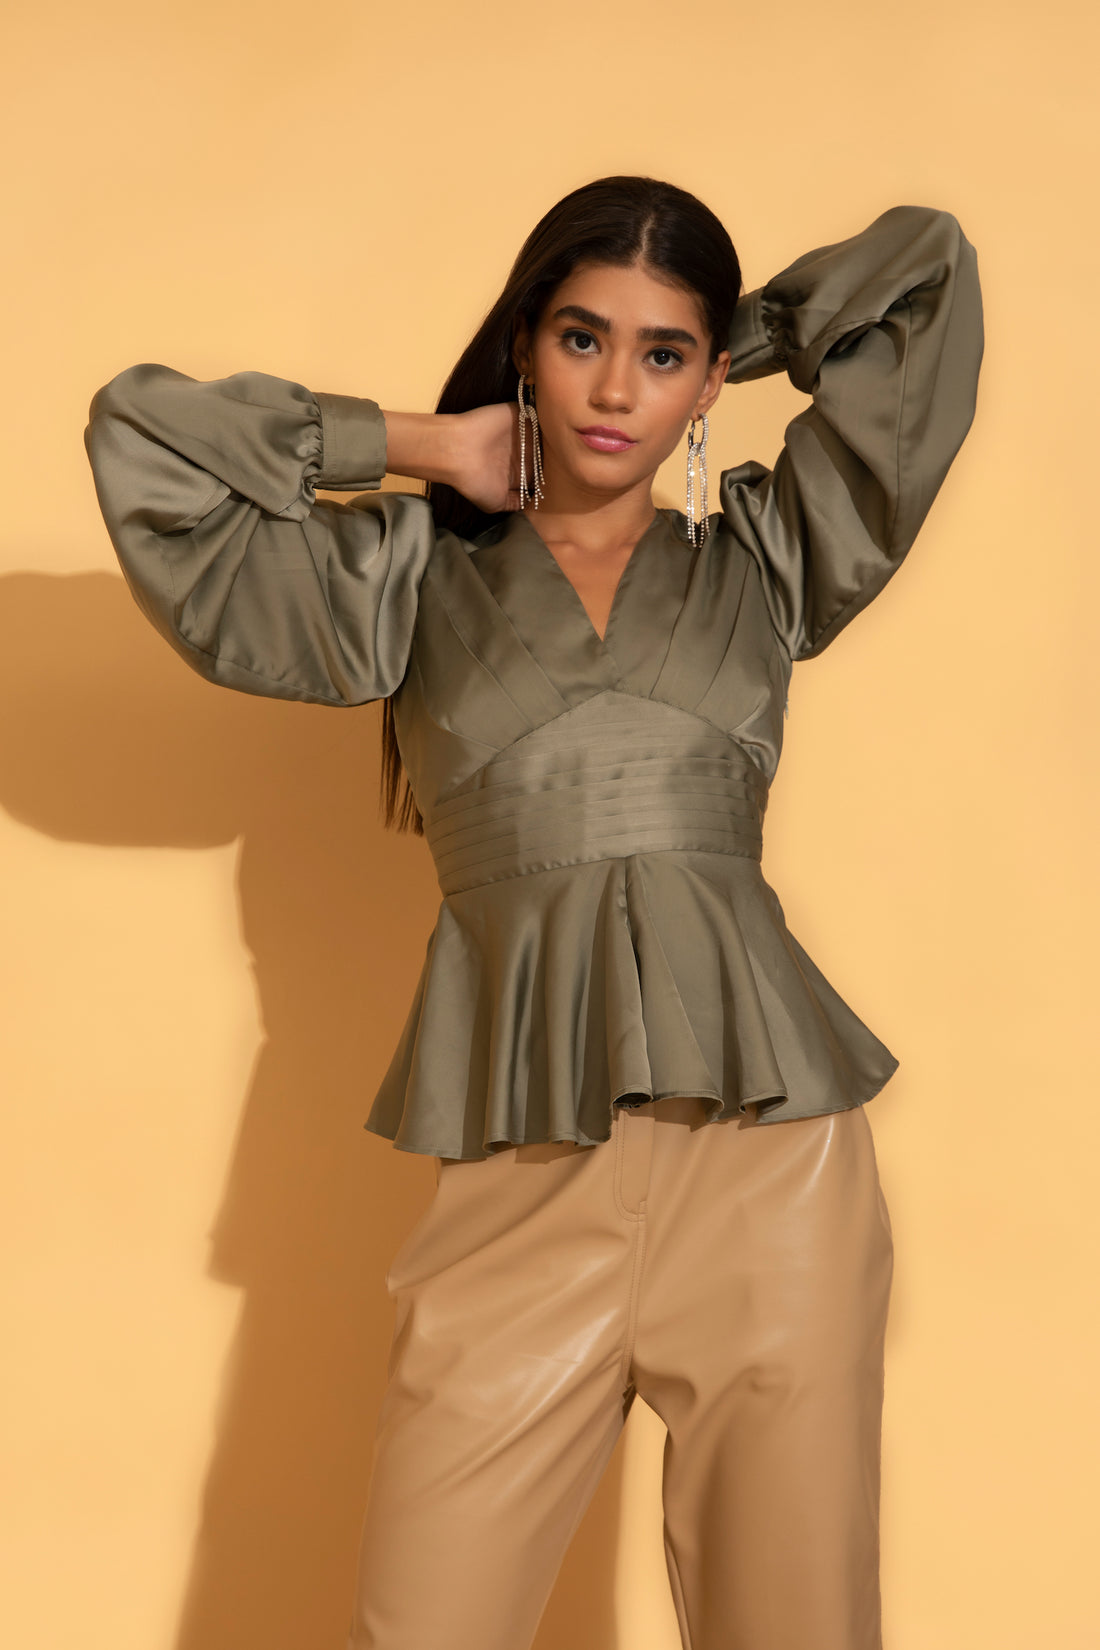 Green satin ruffle top for a casual summer outing or office wear from Torqadorn